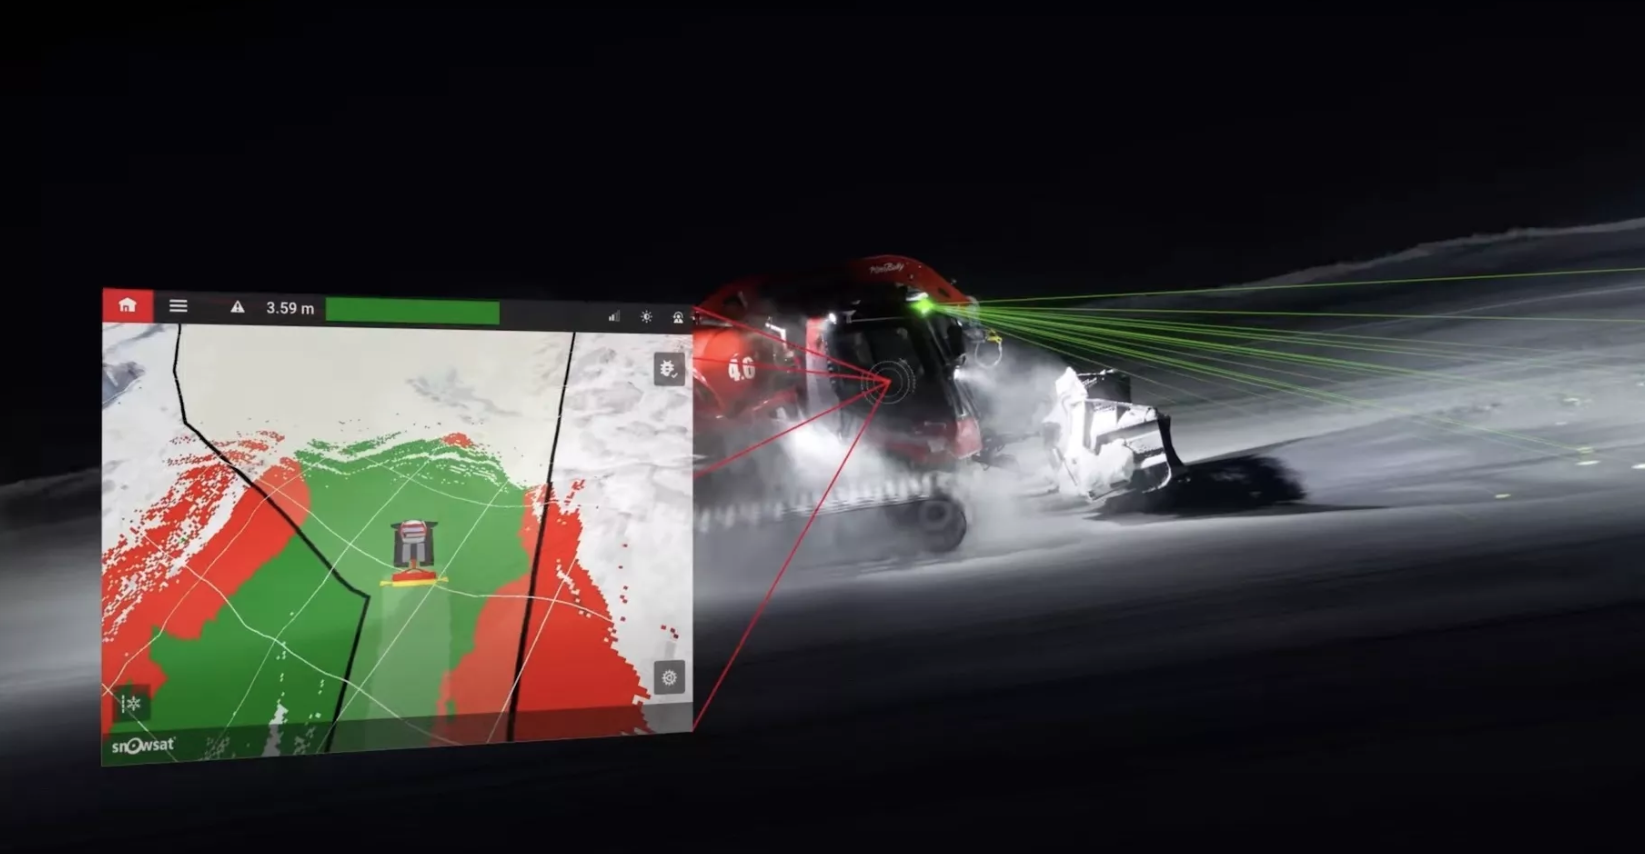 Lidar reads the snow depth in front of the piste machine